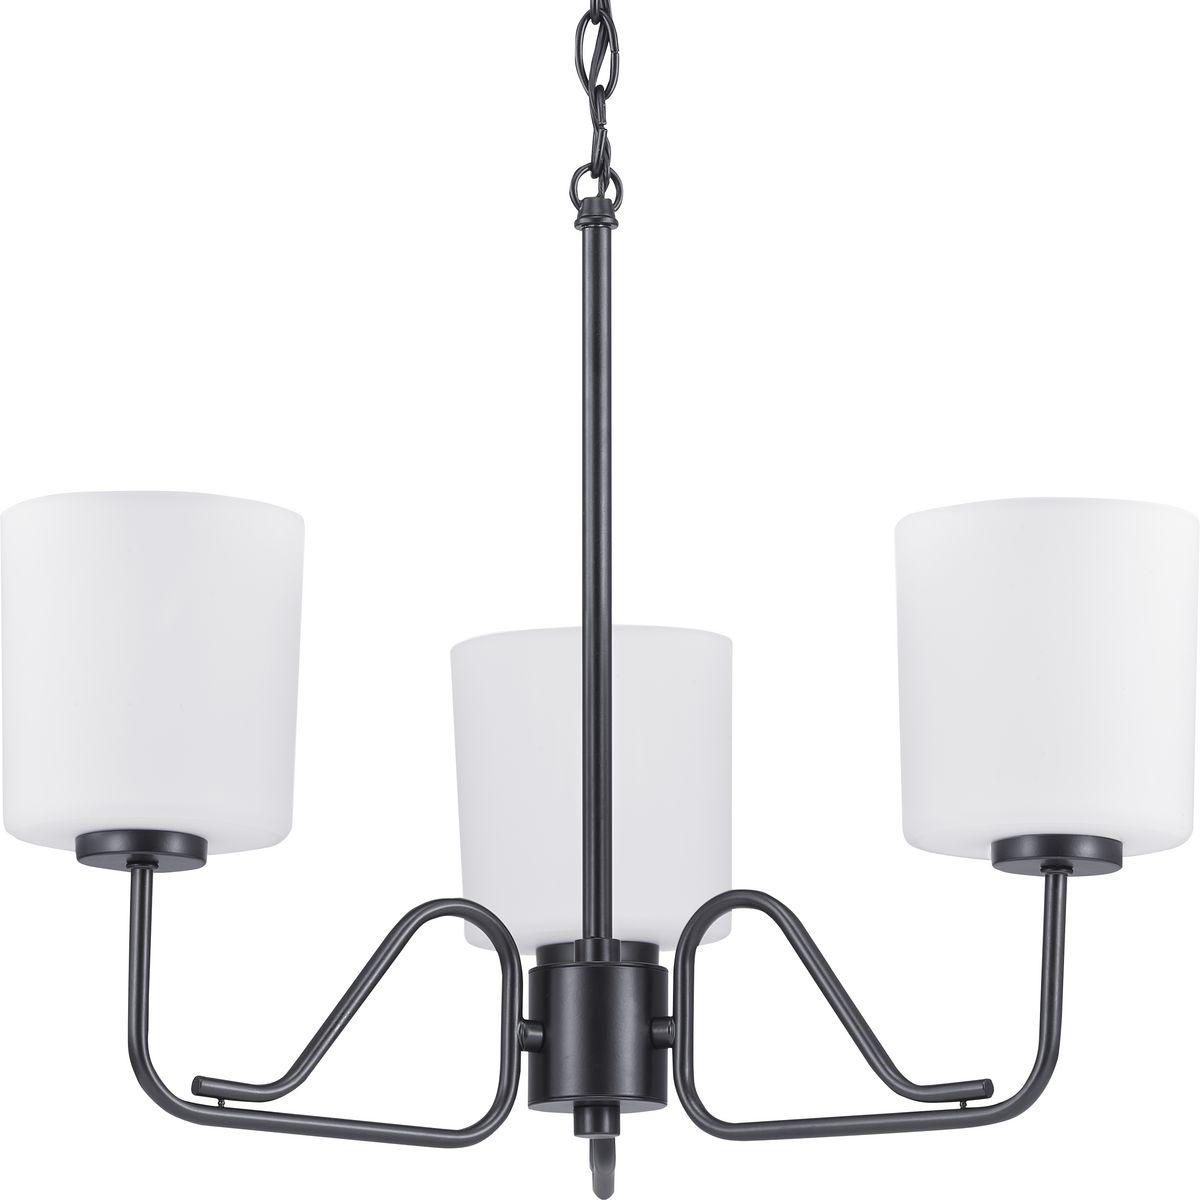 Hubbell P400181-031 A modern take on a classic object, Tobin’s inspiration comes from the timeless mid-century forms. The tubular arms of the three-light chandelier extend outward and are made to form a gentle curve that showcase an etched white glass shade and finished in B